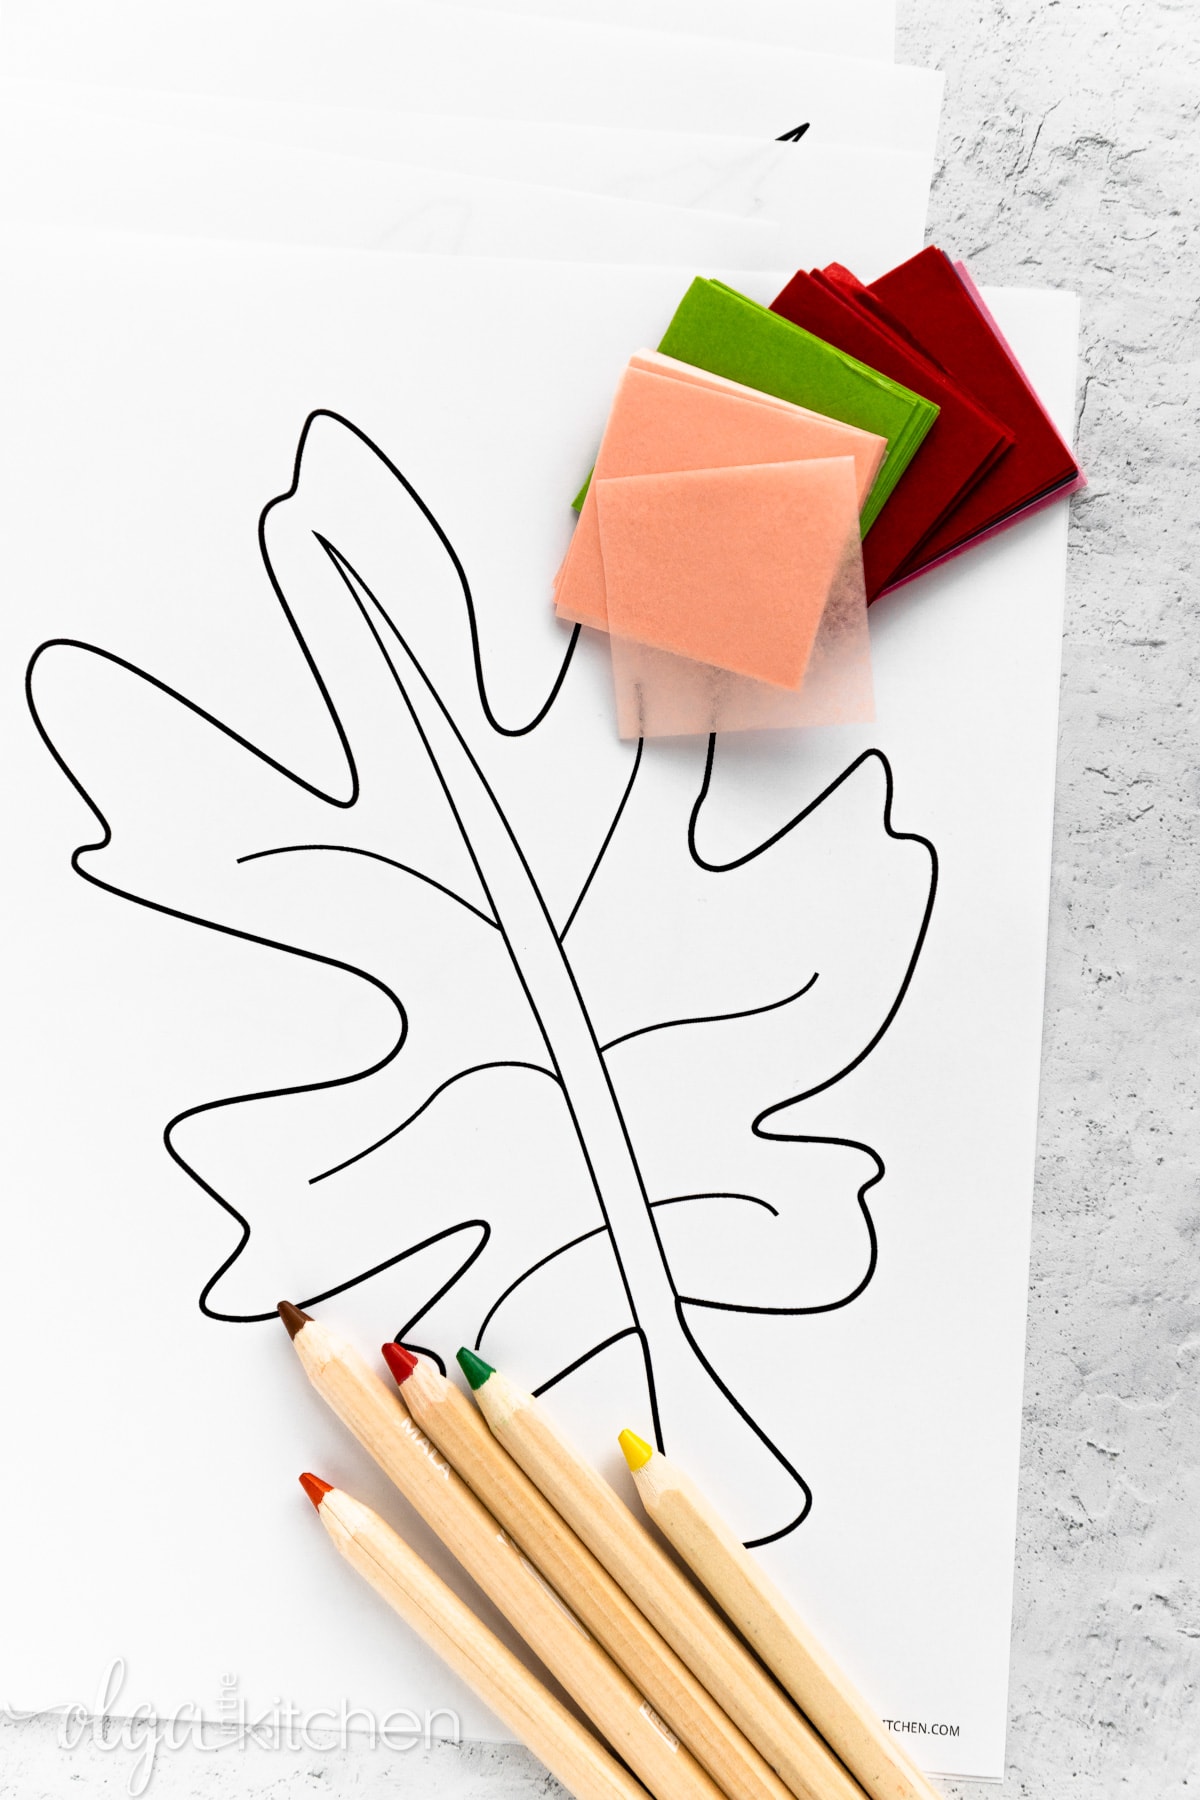 Print off these FREE printable simple autumn leaves coloring pages for a fall rainy day or a simple activity with your kids! #printables #coloringpages #olgainthekitchen #fallactivity #fallcoloring #thanksgiving #crafts #diy